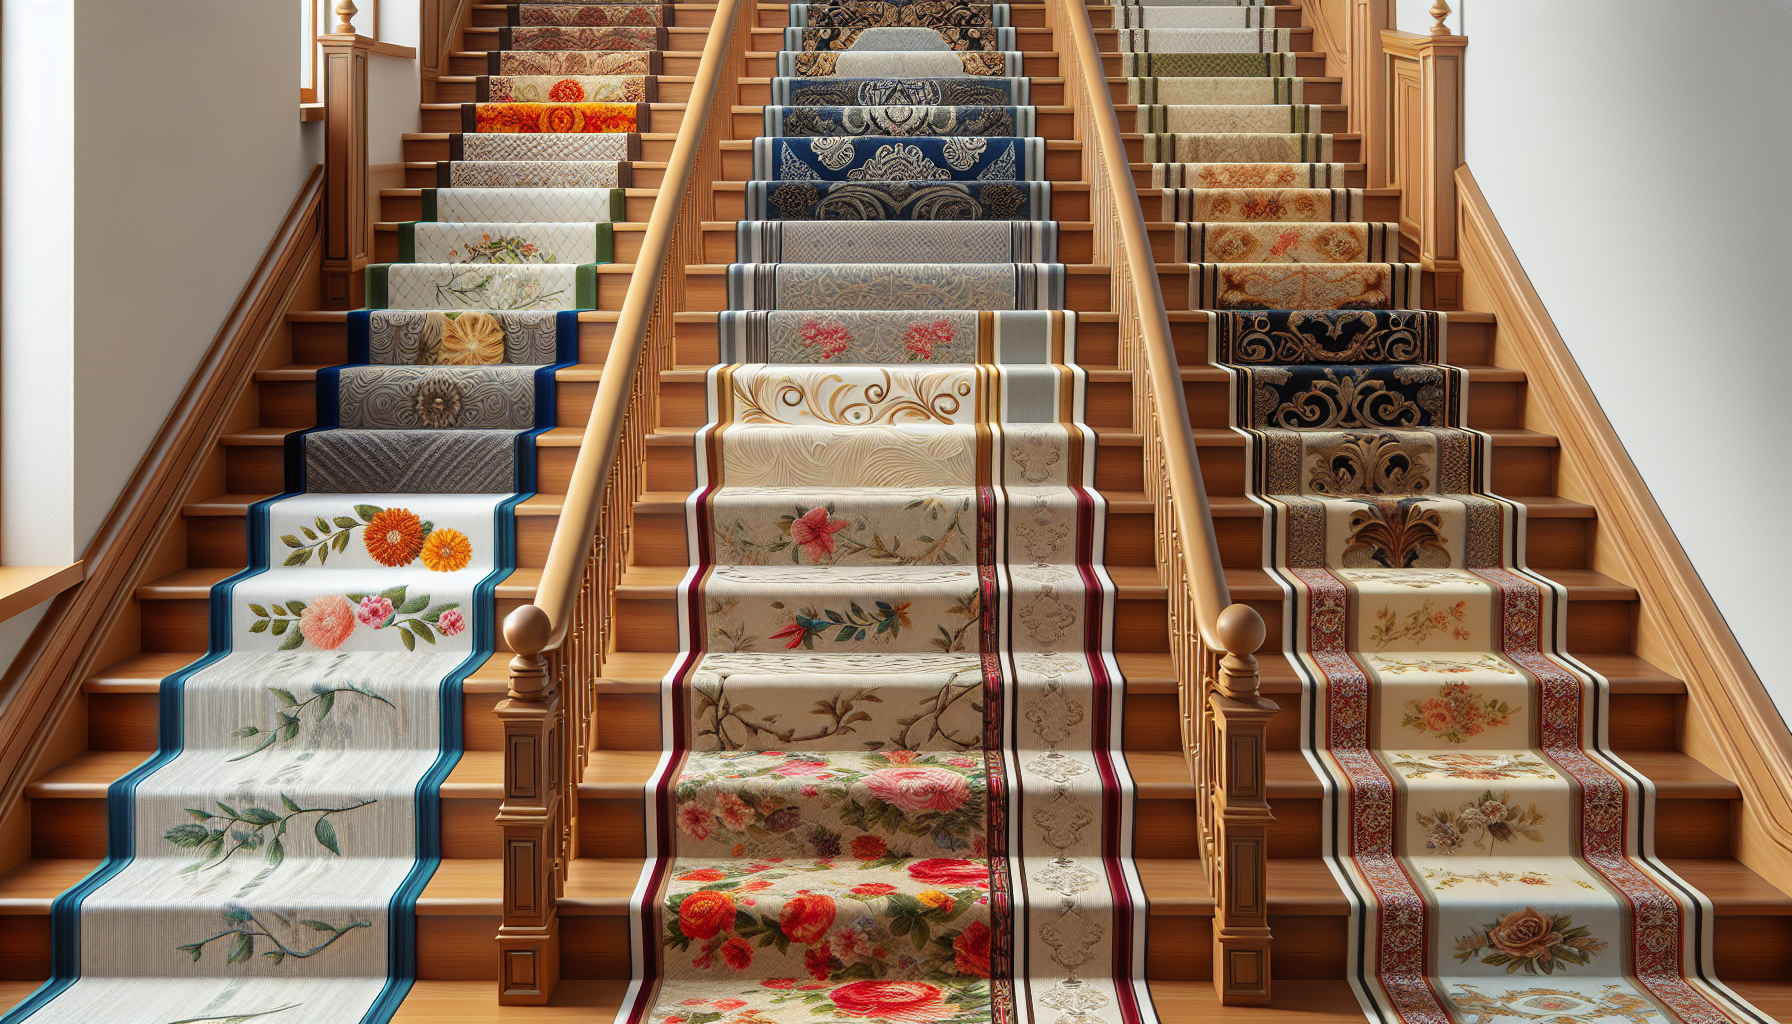 Customizing stair runners for safety